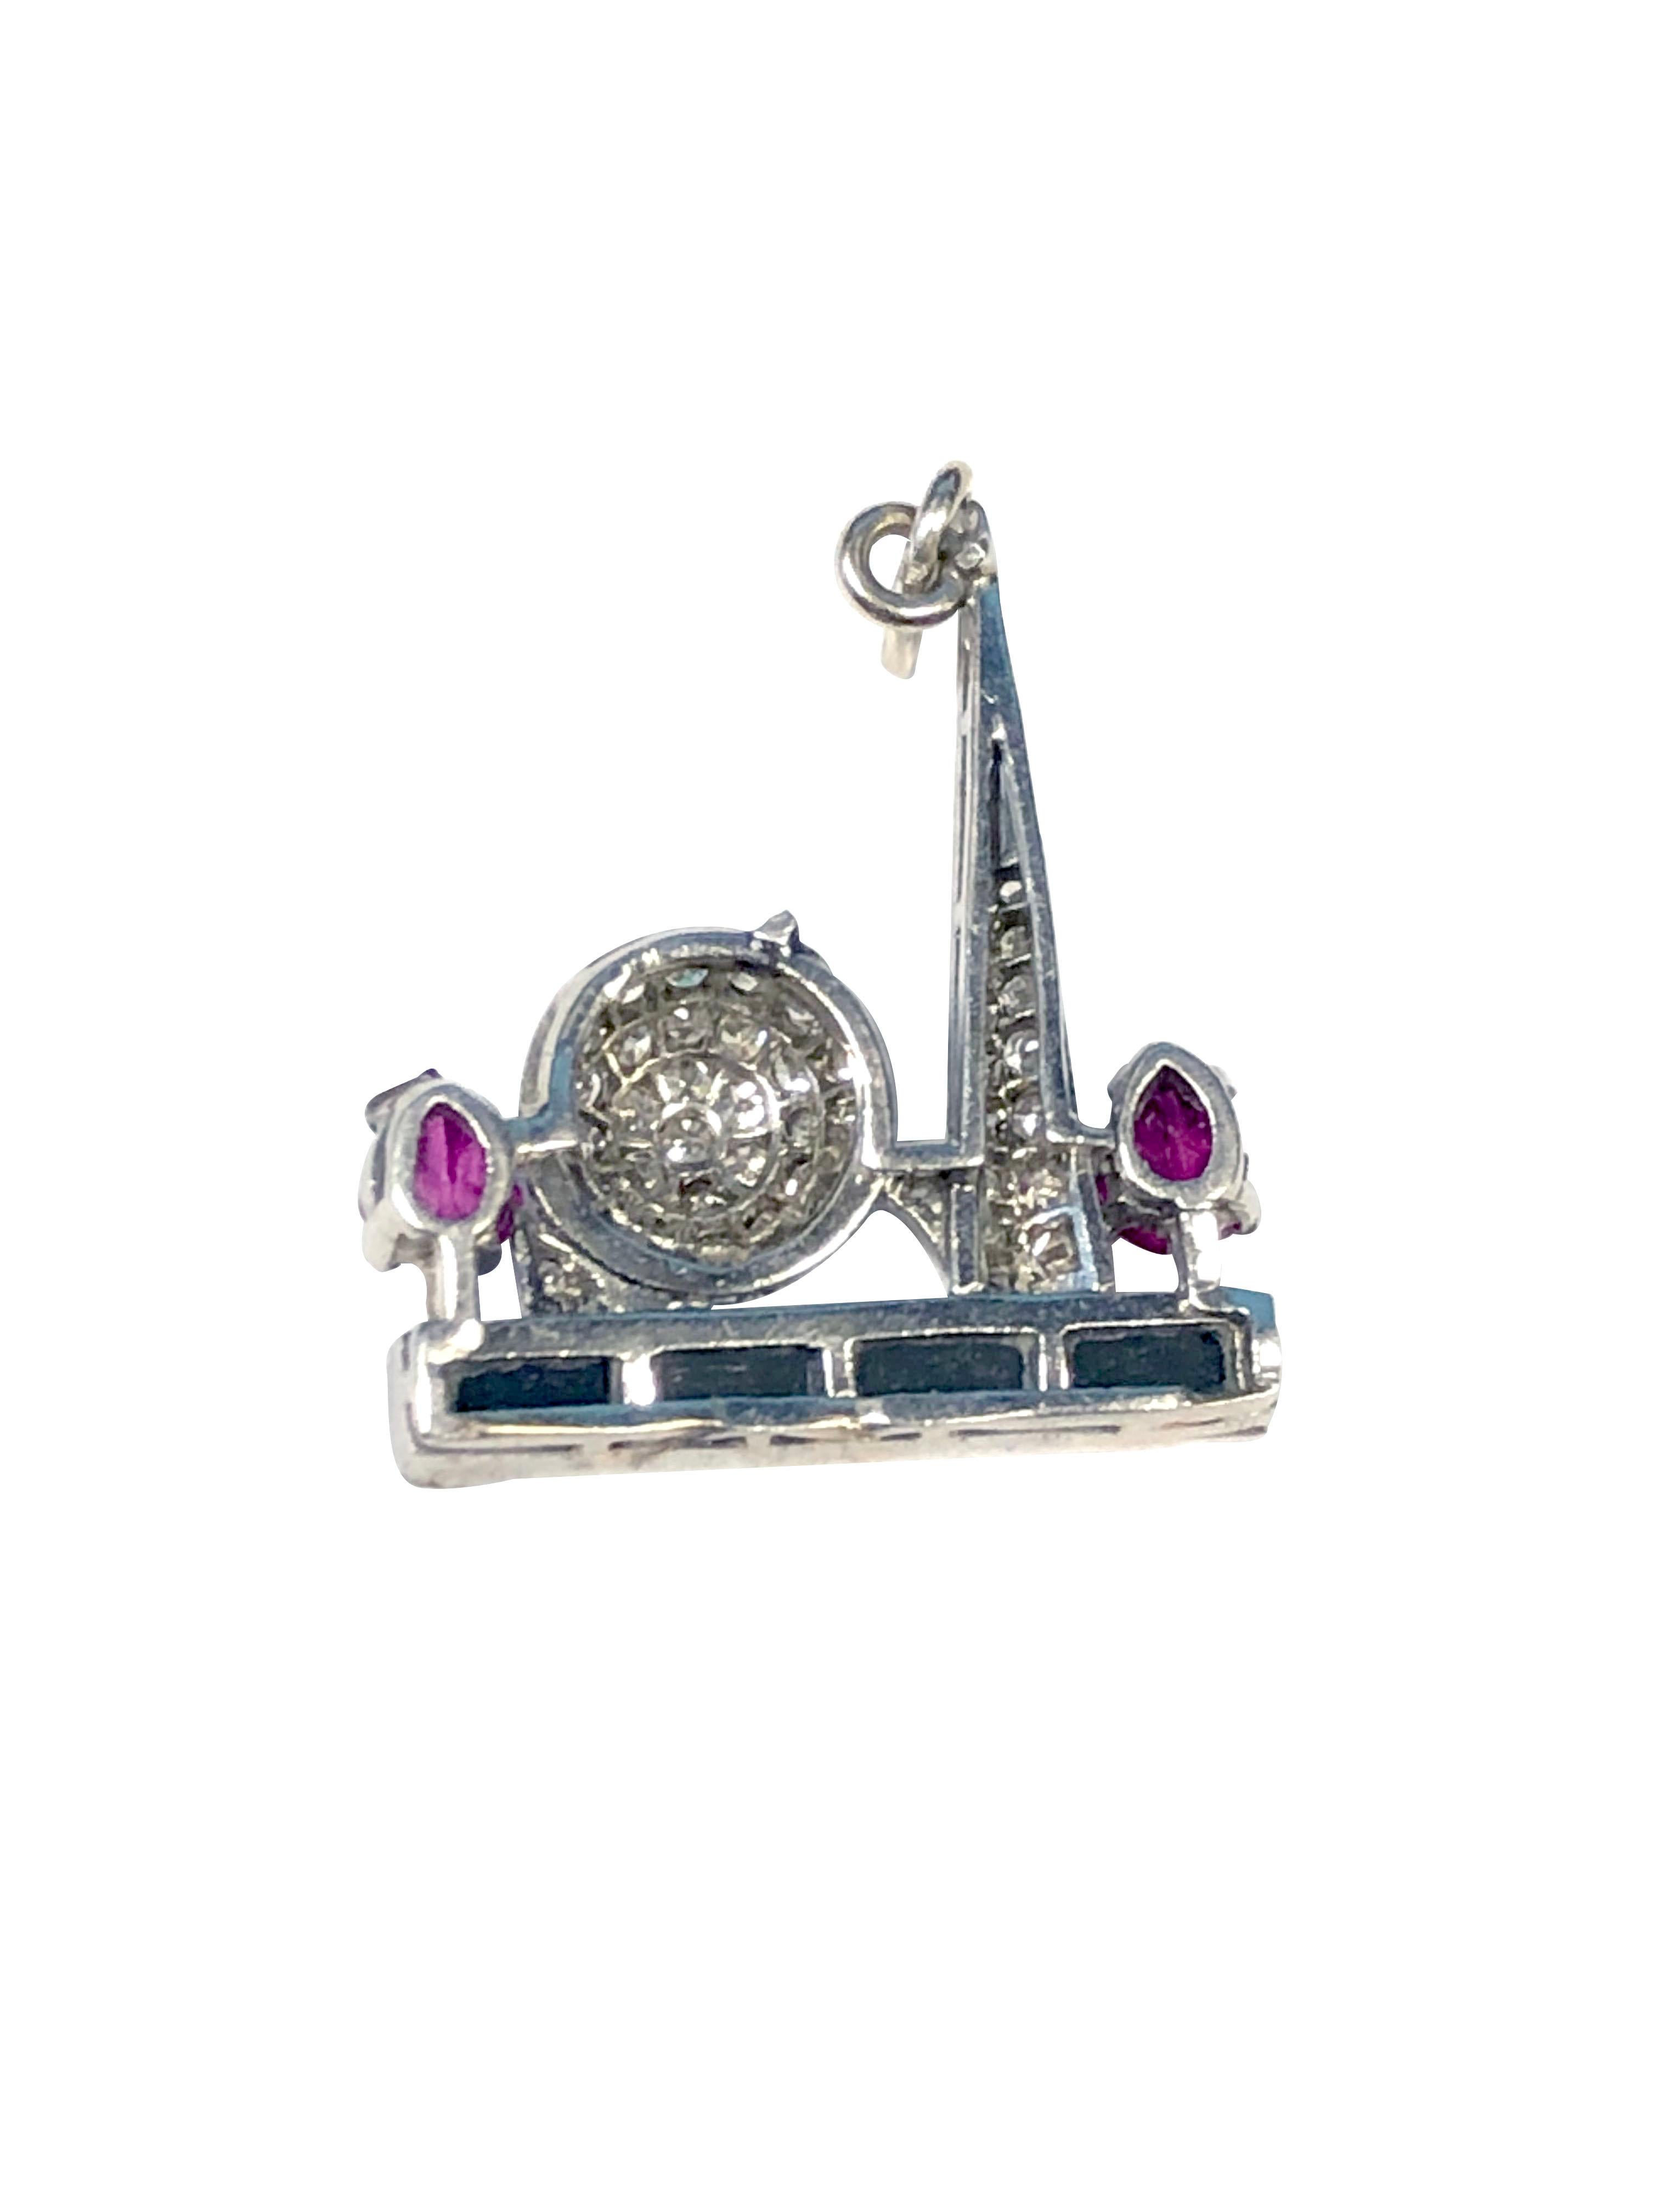 Very Scarce Art Deco 1939 New York Worlds Fair Charm, featuring the famous Trylon and Perisphere the charm - Pendant measures 5/8 X 1 inch and is set with Diamonds, faceted Onyx and Carved Rubies. An extremely hard piece to find.